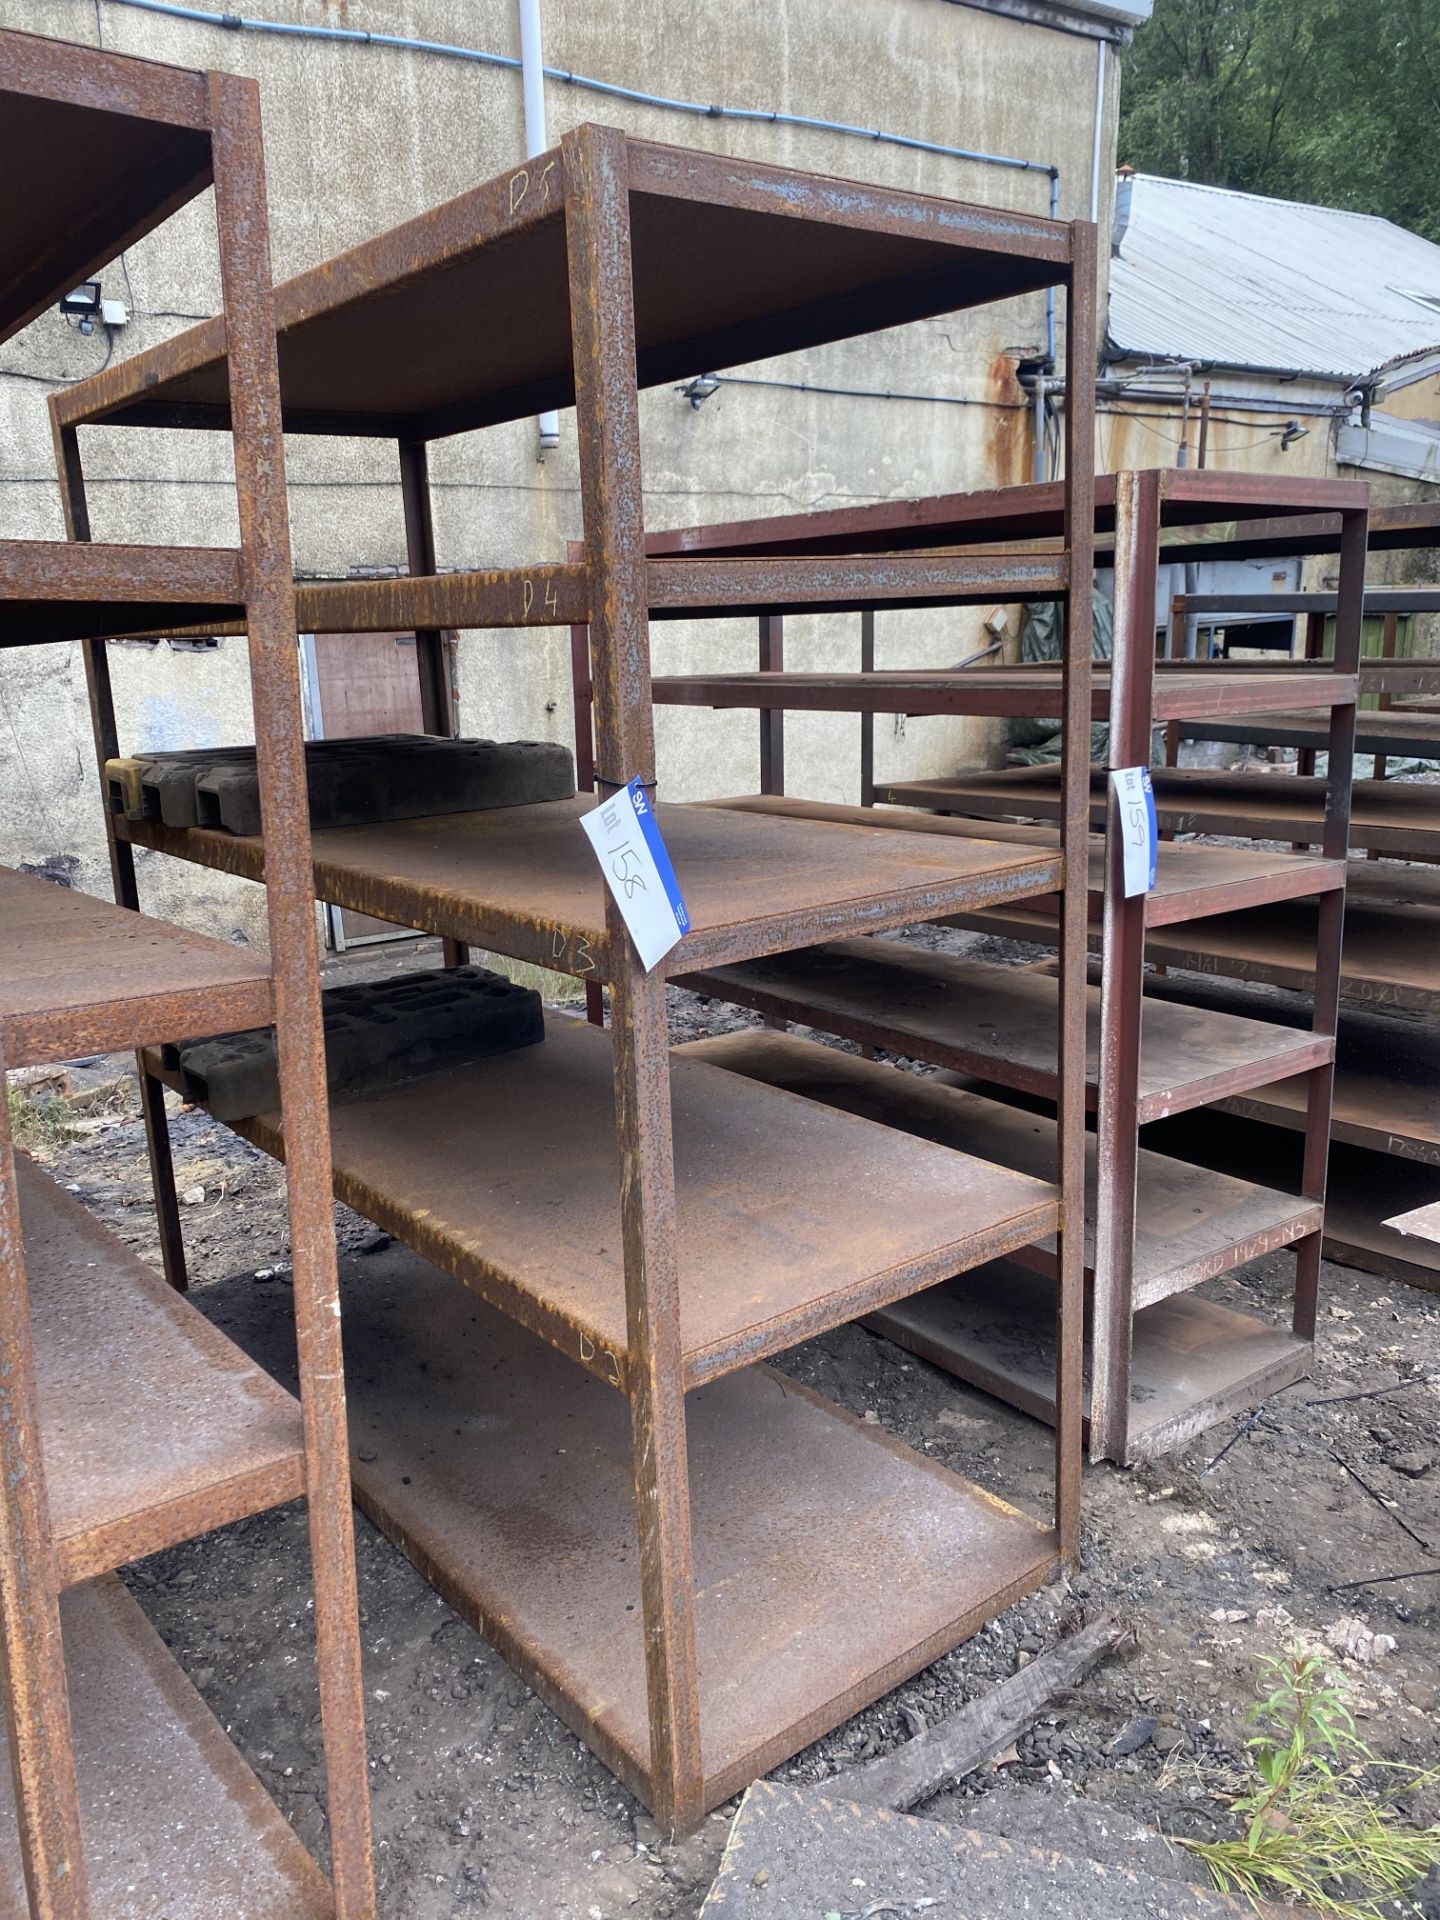 Single Bay Five Tier Steel Rack, 2m wide (take out and loading charges £5 + VAT)Please read the